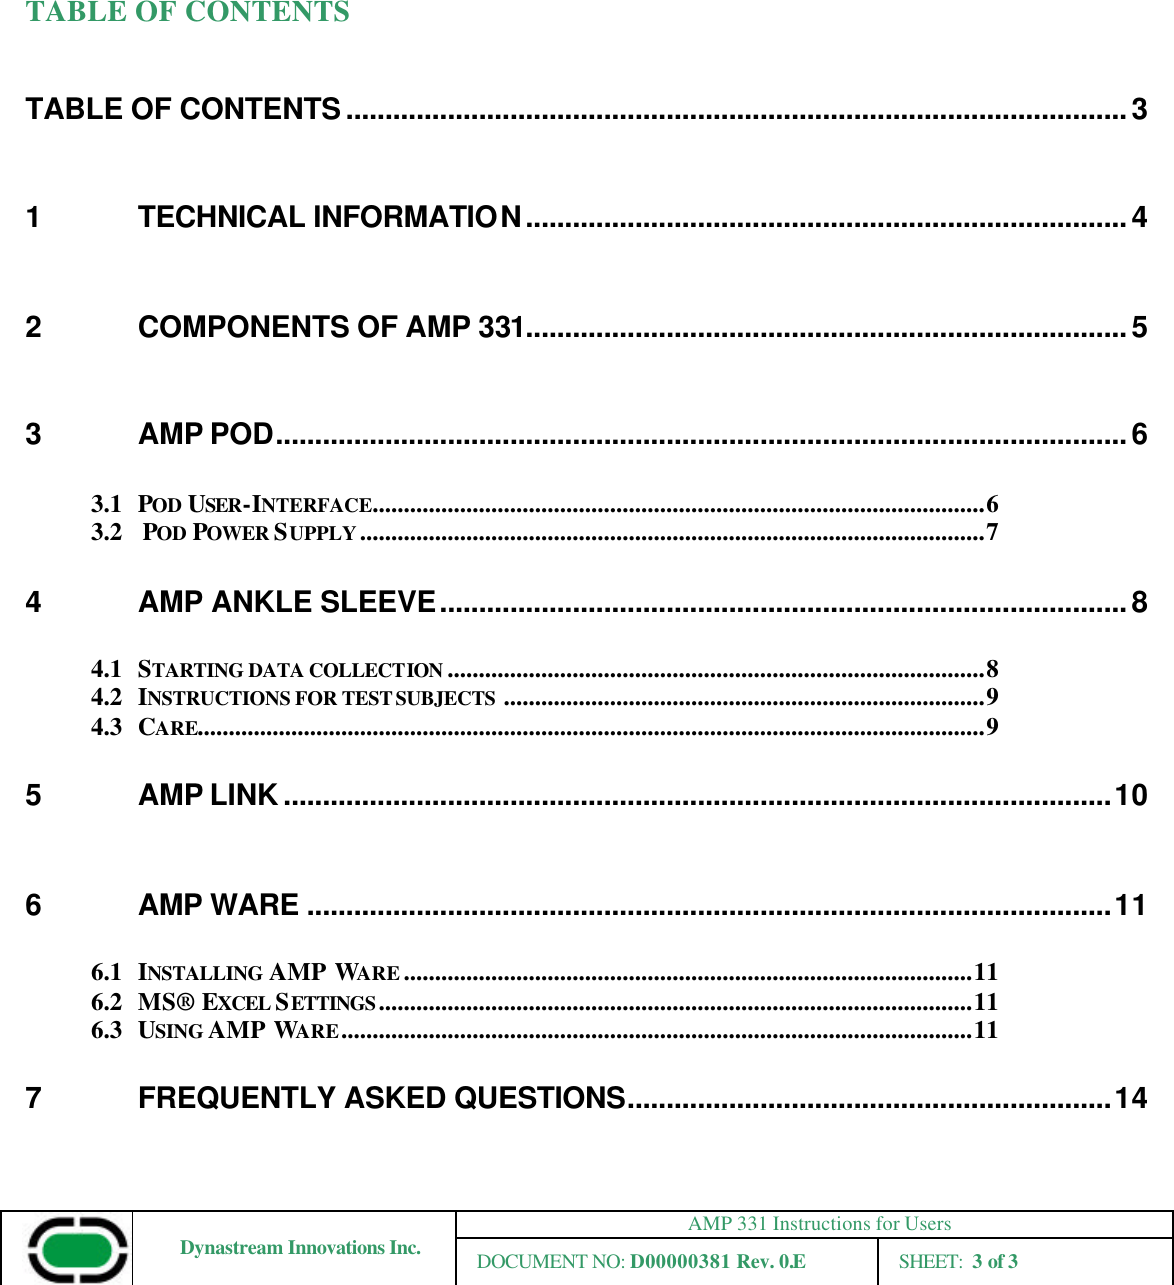 AMP 331 Instructions for Users Dynastream Innovations Inc. DOCUMENT NO: D00000381 Rev. 0.E SHEET:  3 of 3   TABLE OF CONTENTS TABLE OF CONTENTS....................................................................................................3 1 TECHNICAL INFORMATION.............................................................................4 2 COMPONENTS OF AMP 331.............................................................................5 3 AMP POD.............................................................................................................6 3.1 POD USER-INTERFACE..................................................................................................6 3.2  POD POWER SUPPLY....................................................................................................7 4 AMP ANKLE SLEEVE........................................................................................8 4.1 STARTING DATA COLLECTION ......................................................................................8 4.2 INSTRUCTIONS FOR TEST SUBJECTS .............................................................................9 4.3  CARE..............................................................................................................................9 5 AMP LINK..........................................................................................................10 6 AMP WARE .......................................................................................................11 6.1  INSTALLING  AMP WARE...........................................................................................11 6.2  MS® EXCEL SETTINGS...............................................................................................11 6.3  USING AMP WARE.....................................................................................................11 7 FREQUENTLY ASKED QUESTIONS..............................................................14 